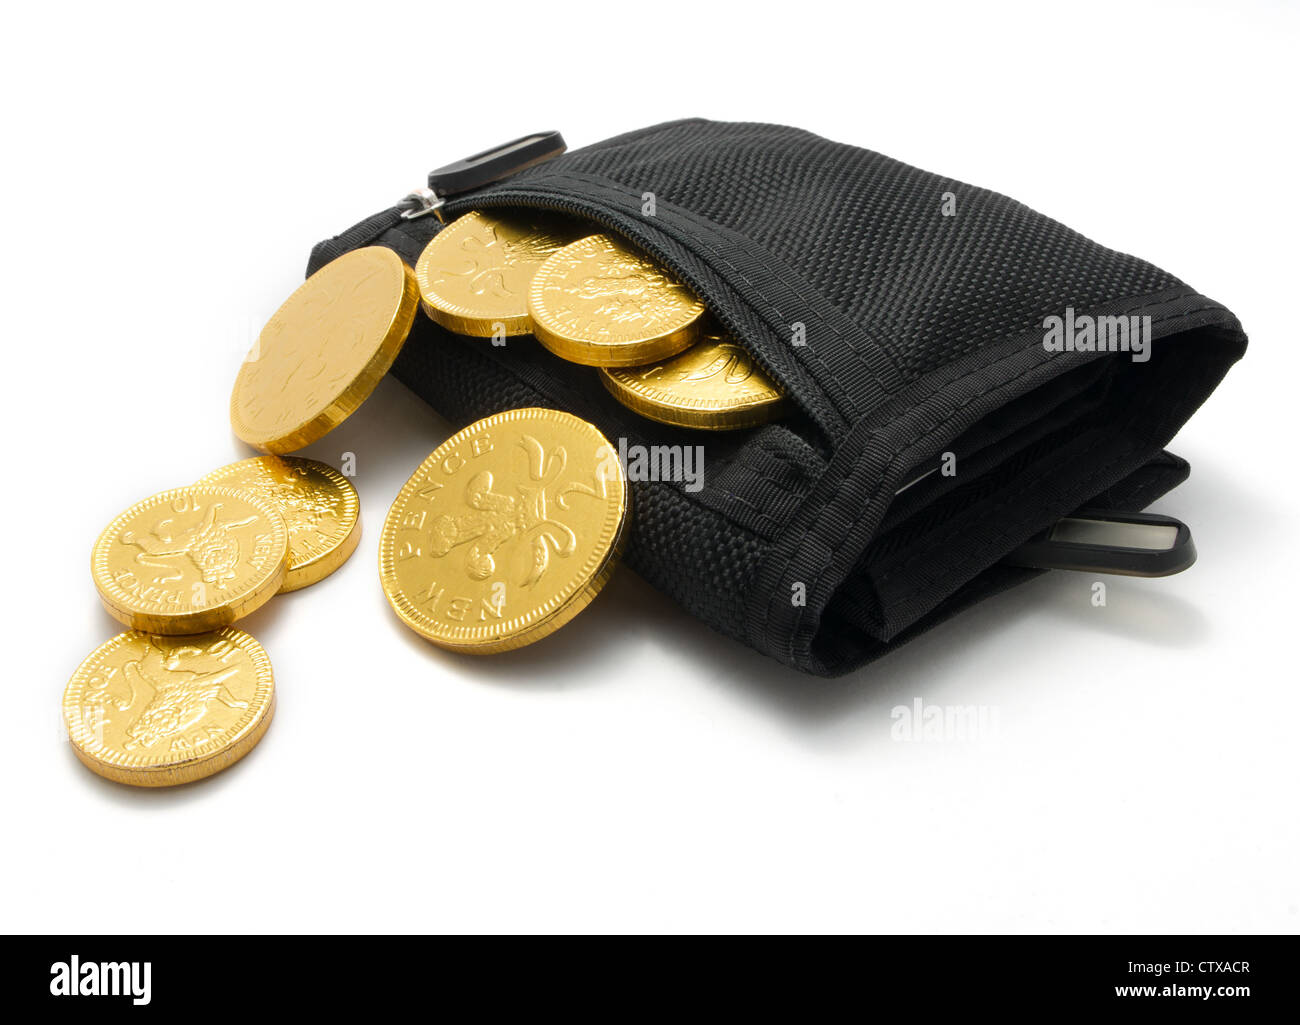 a black fabric wallet overflowing with chocolate coins in a golden CTXACR